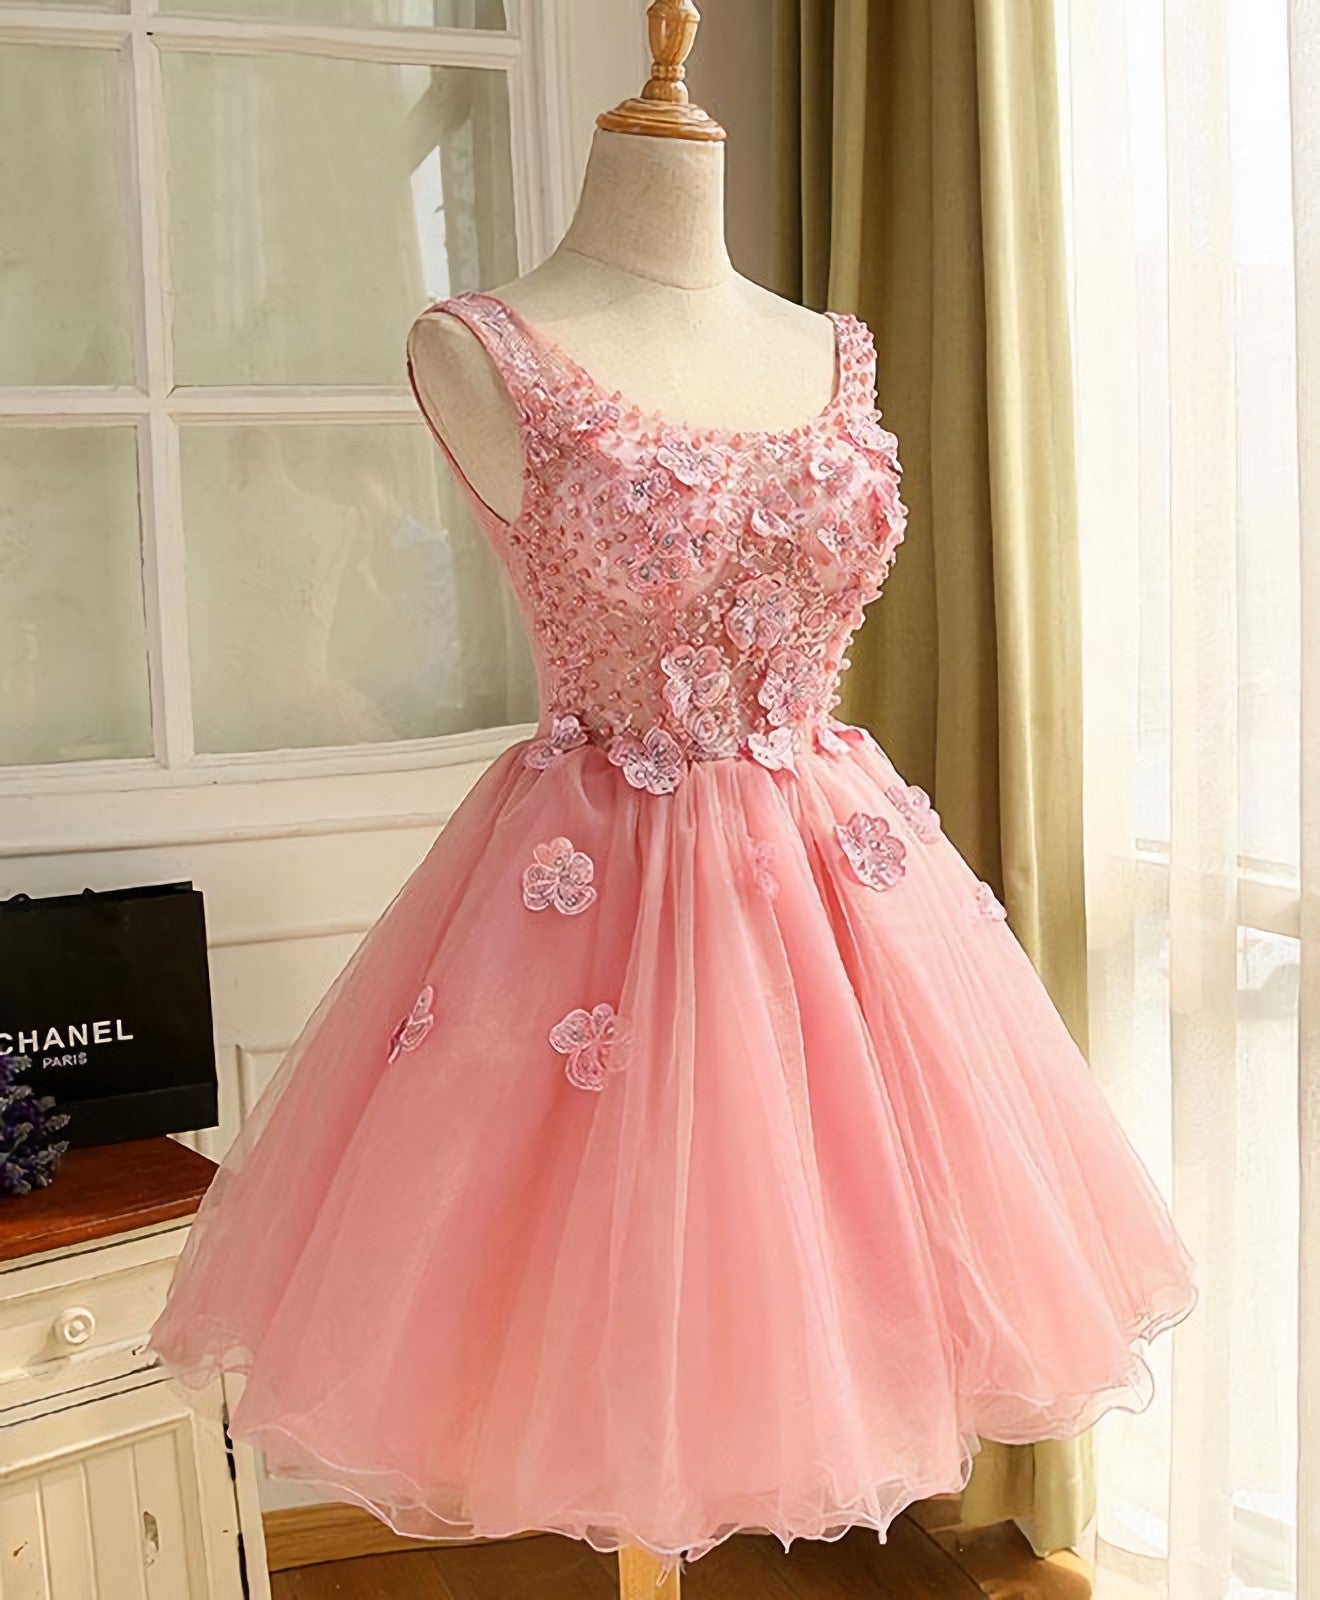 Party Dress Midi With Sleeves, Cute A Line Pink Tulle Pearl Short Prom Dress, Homecoming Dress